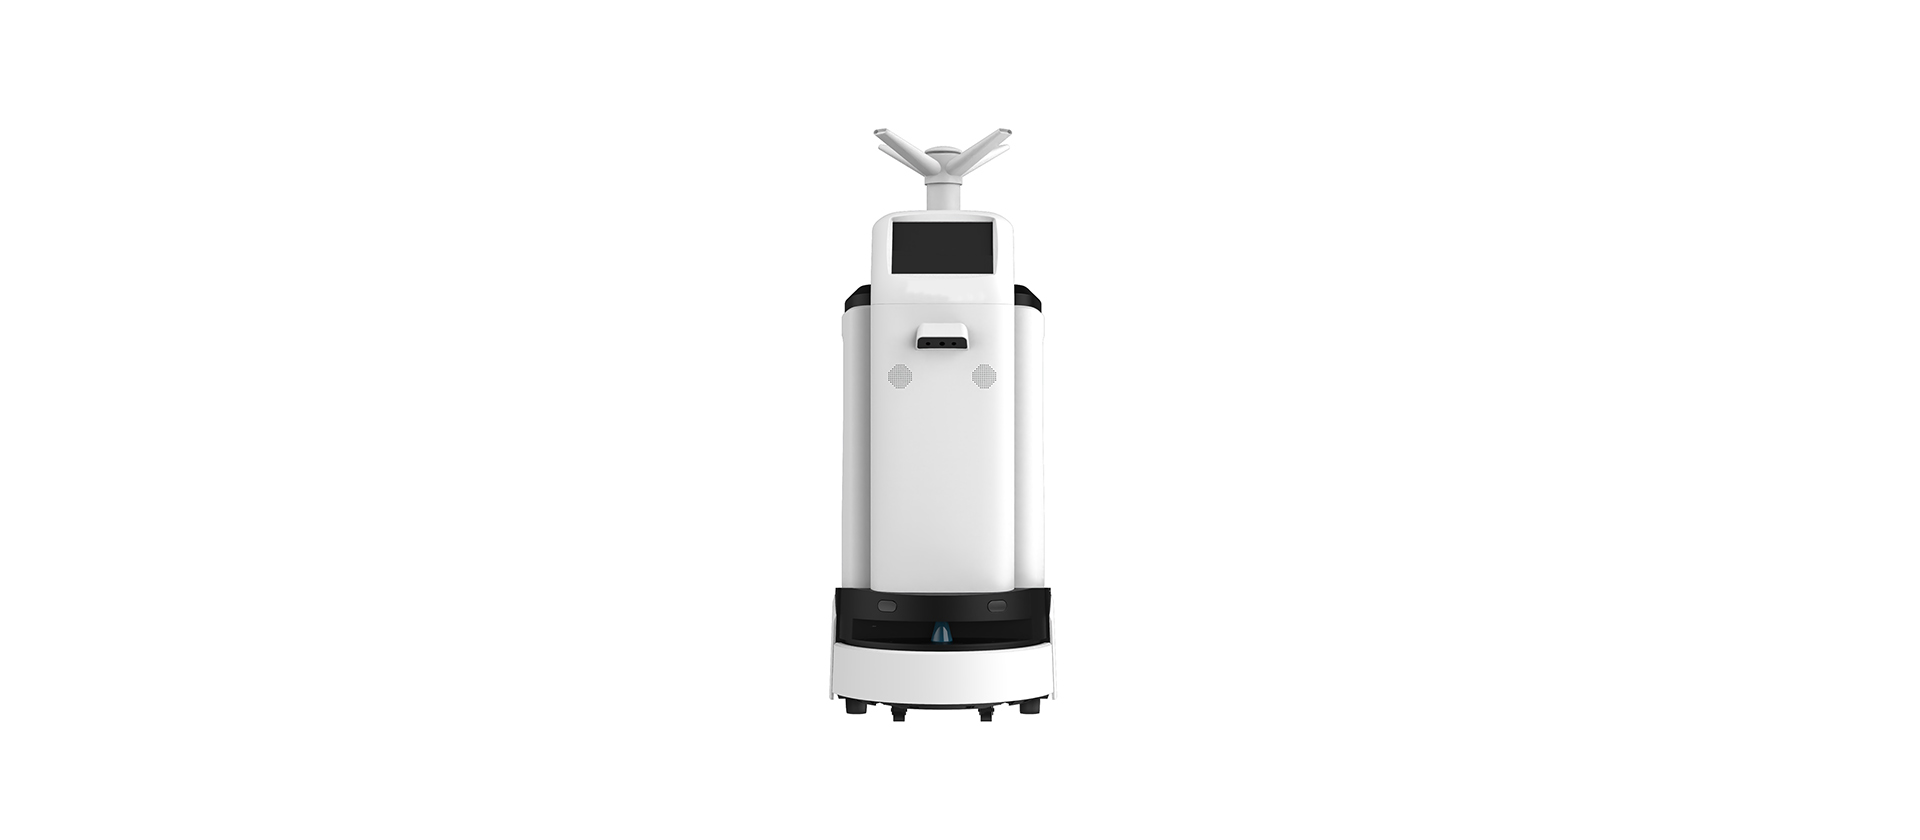 One-Stop Commercial Robot Solution